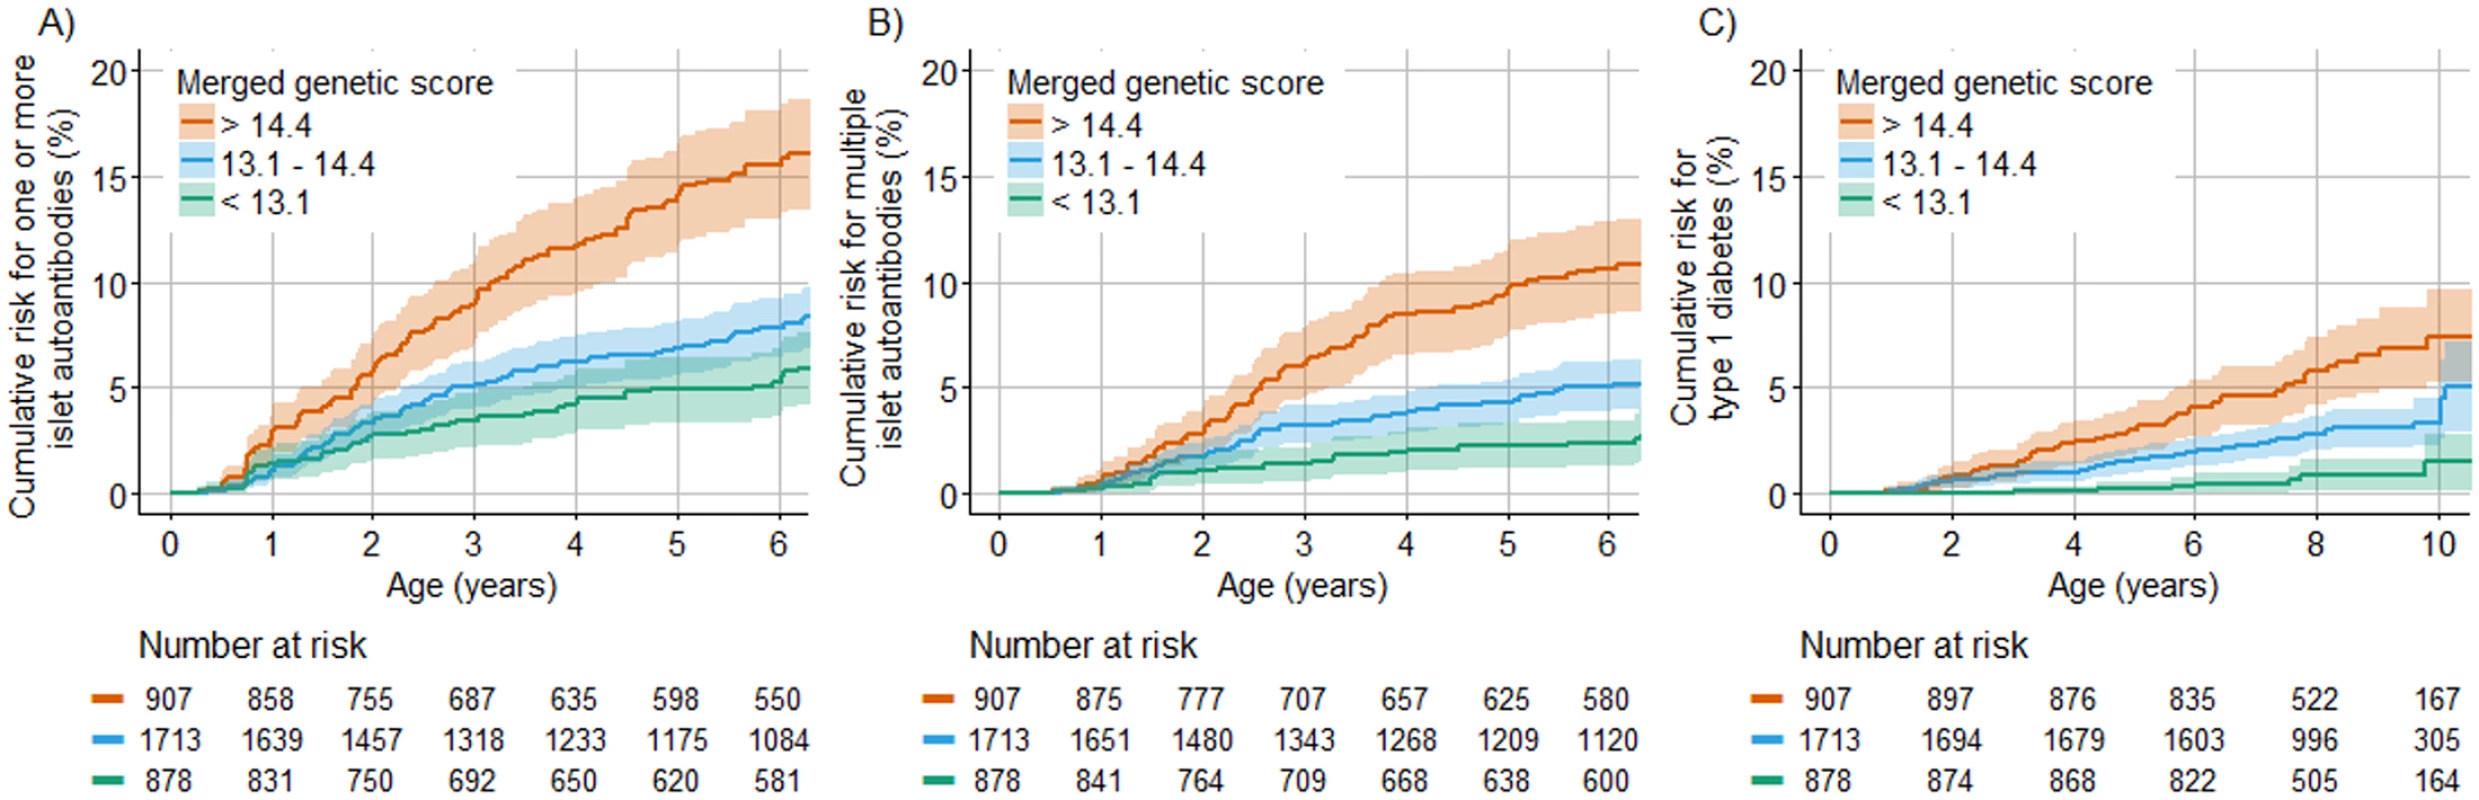 Cumulative risks of 1 or more islet autoantibody, multiple islet autoantibody, and type 1 diabetes development in TEDDY children with the HLA DR3/DR4-DQ8 or DR4-DQ8/DR4-DQ8 genotype stratified by their merged score.